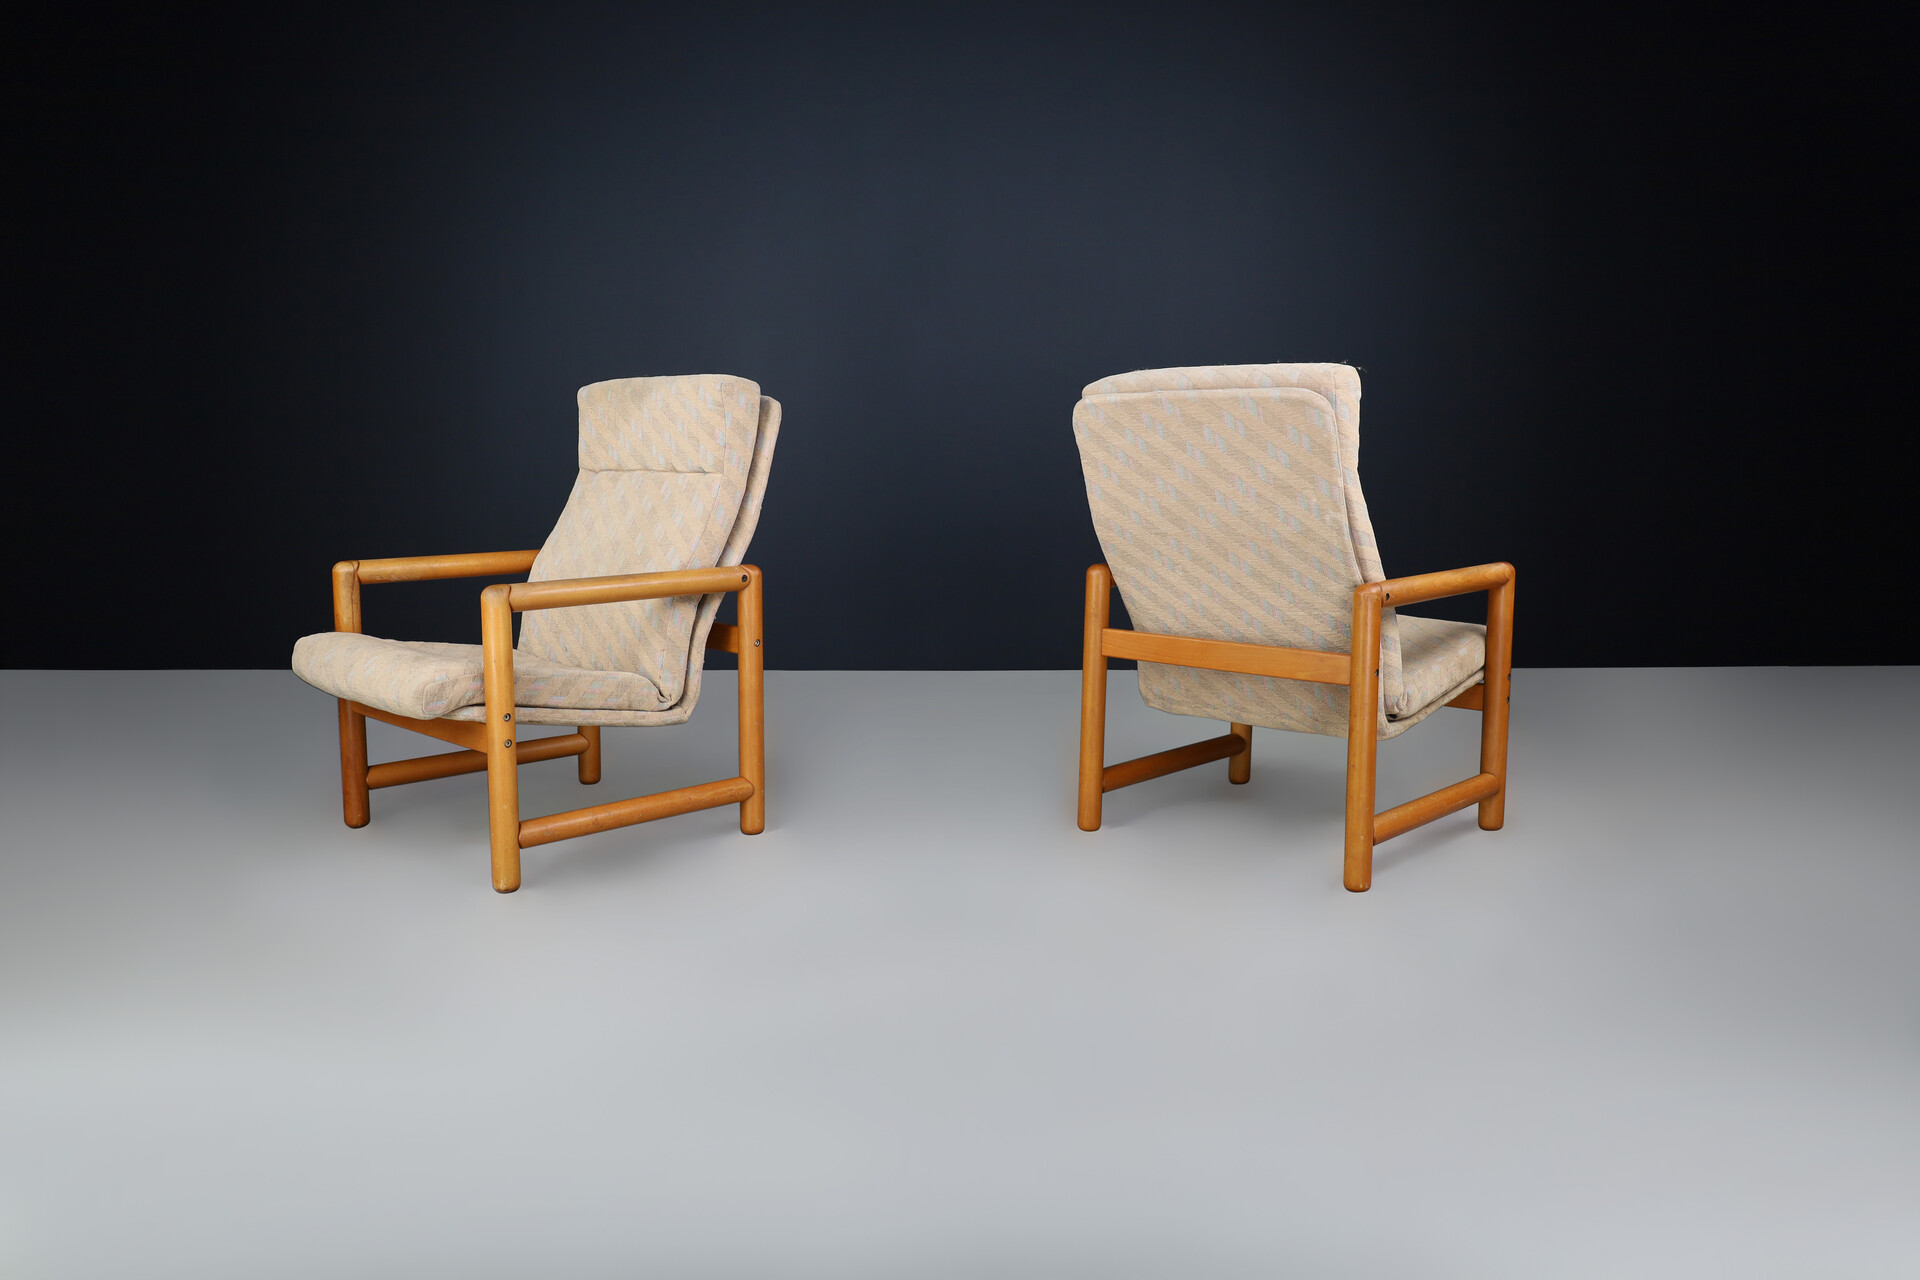 Mid century modern Armchairs / lounge chairs in original fabric and wood, Cz 1970s Late-20th century